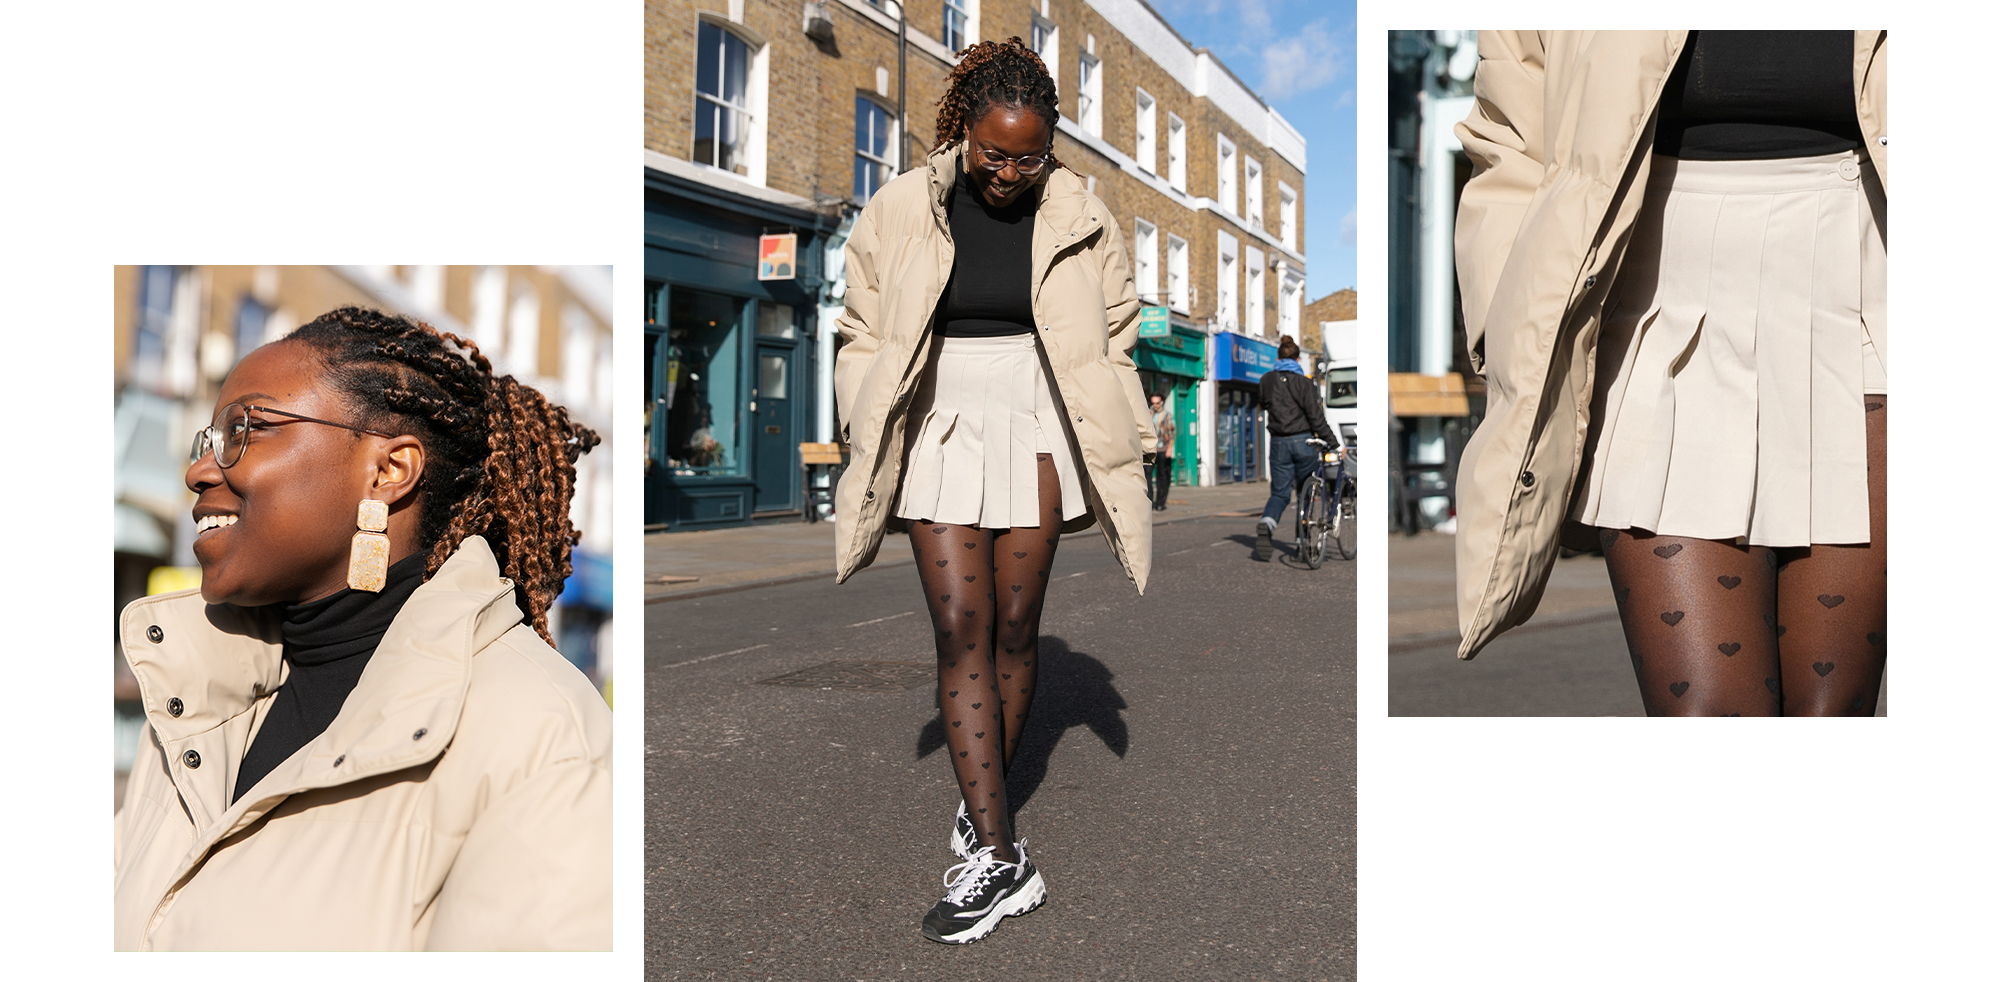 London Street Style Trends: Best Autumn Outfit